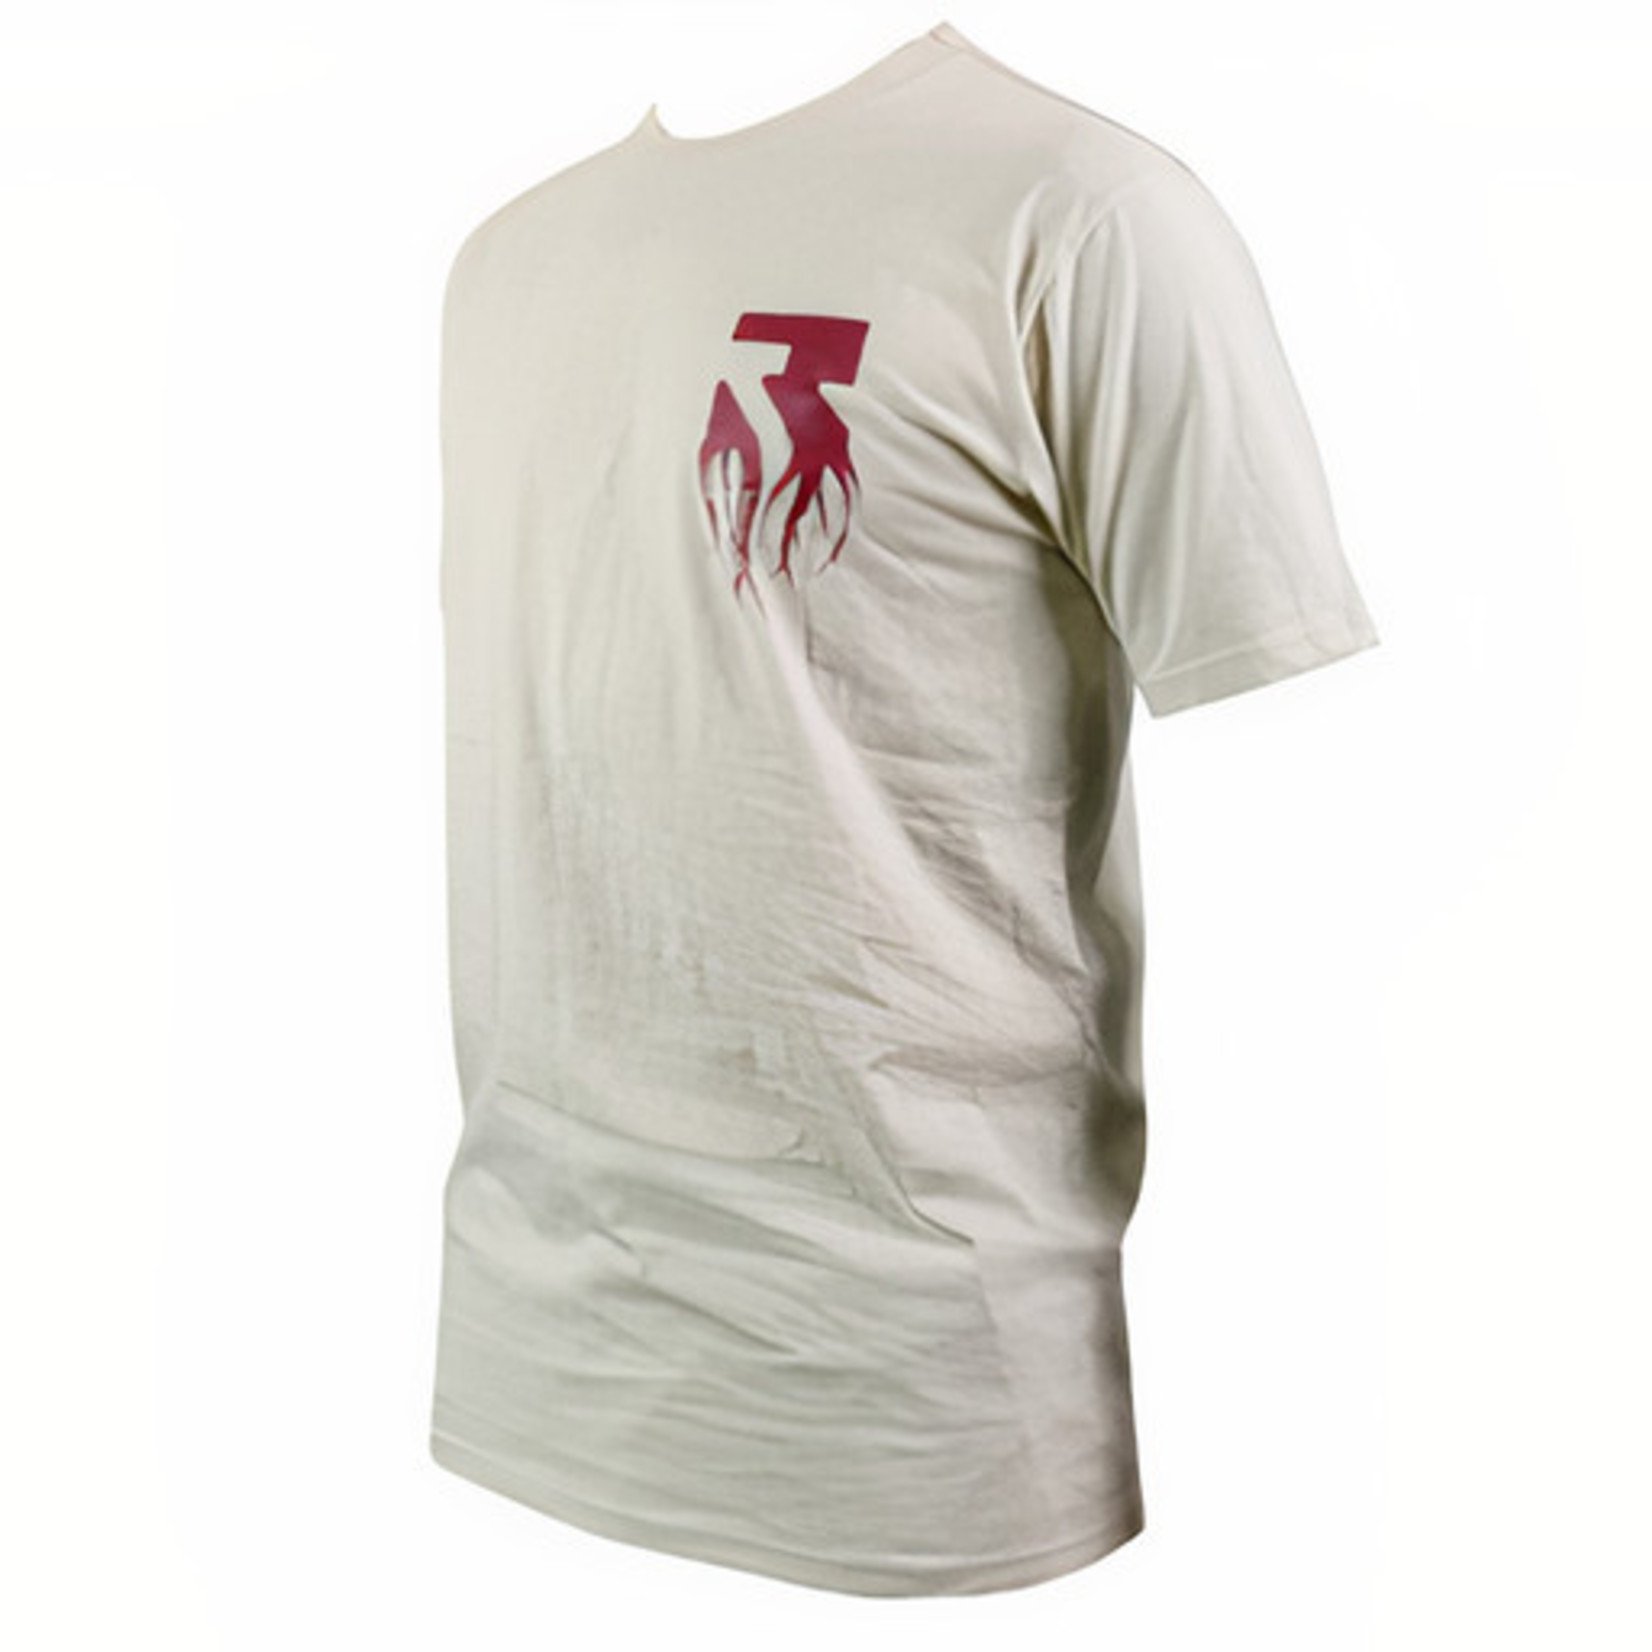 Root Industries Root Industries - Youth T-Shirt - ROOTED Sand / Burgundy